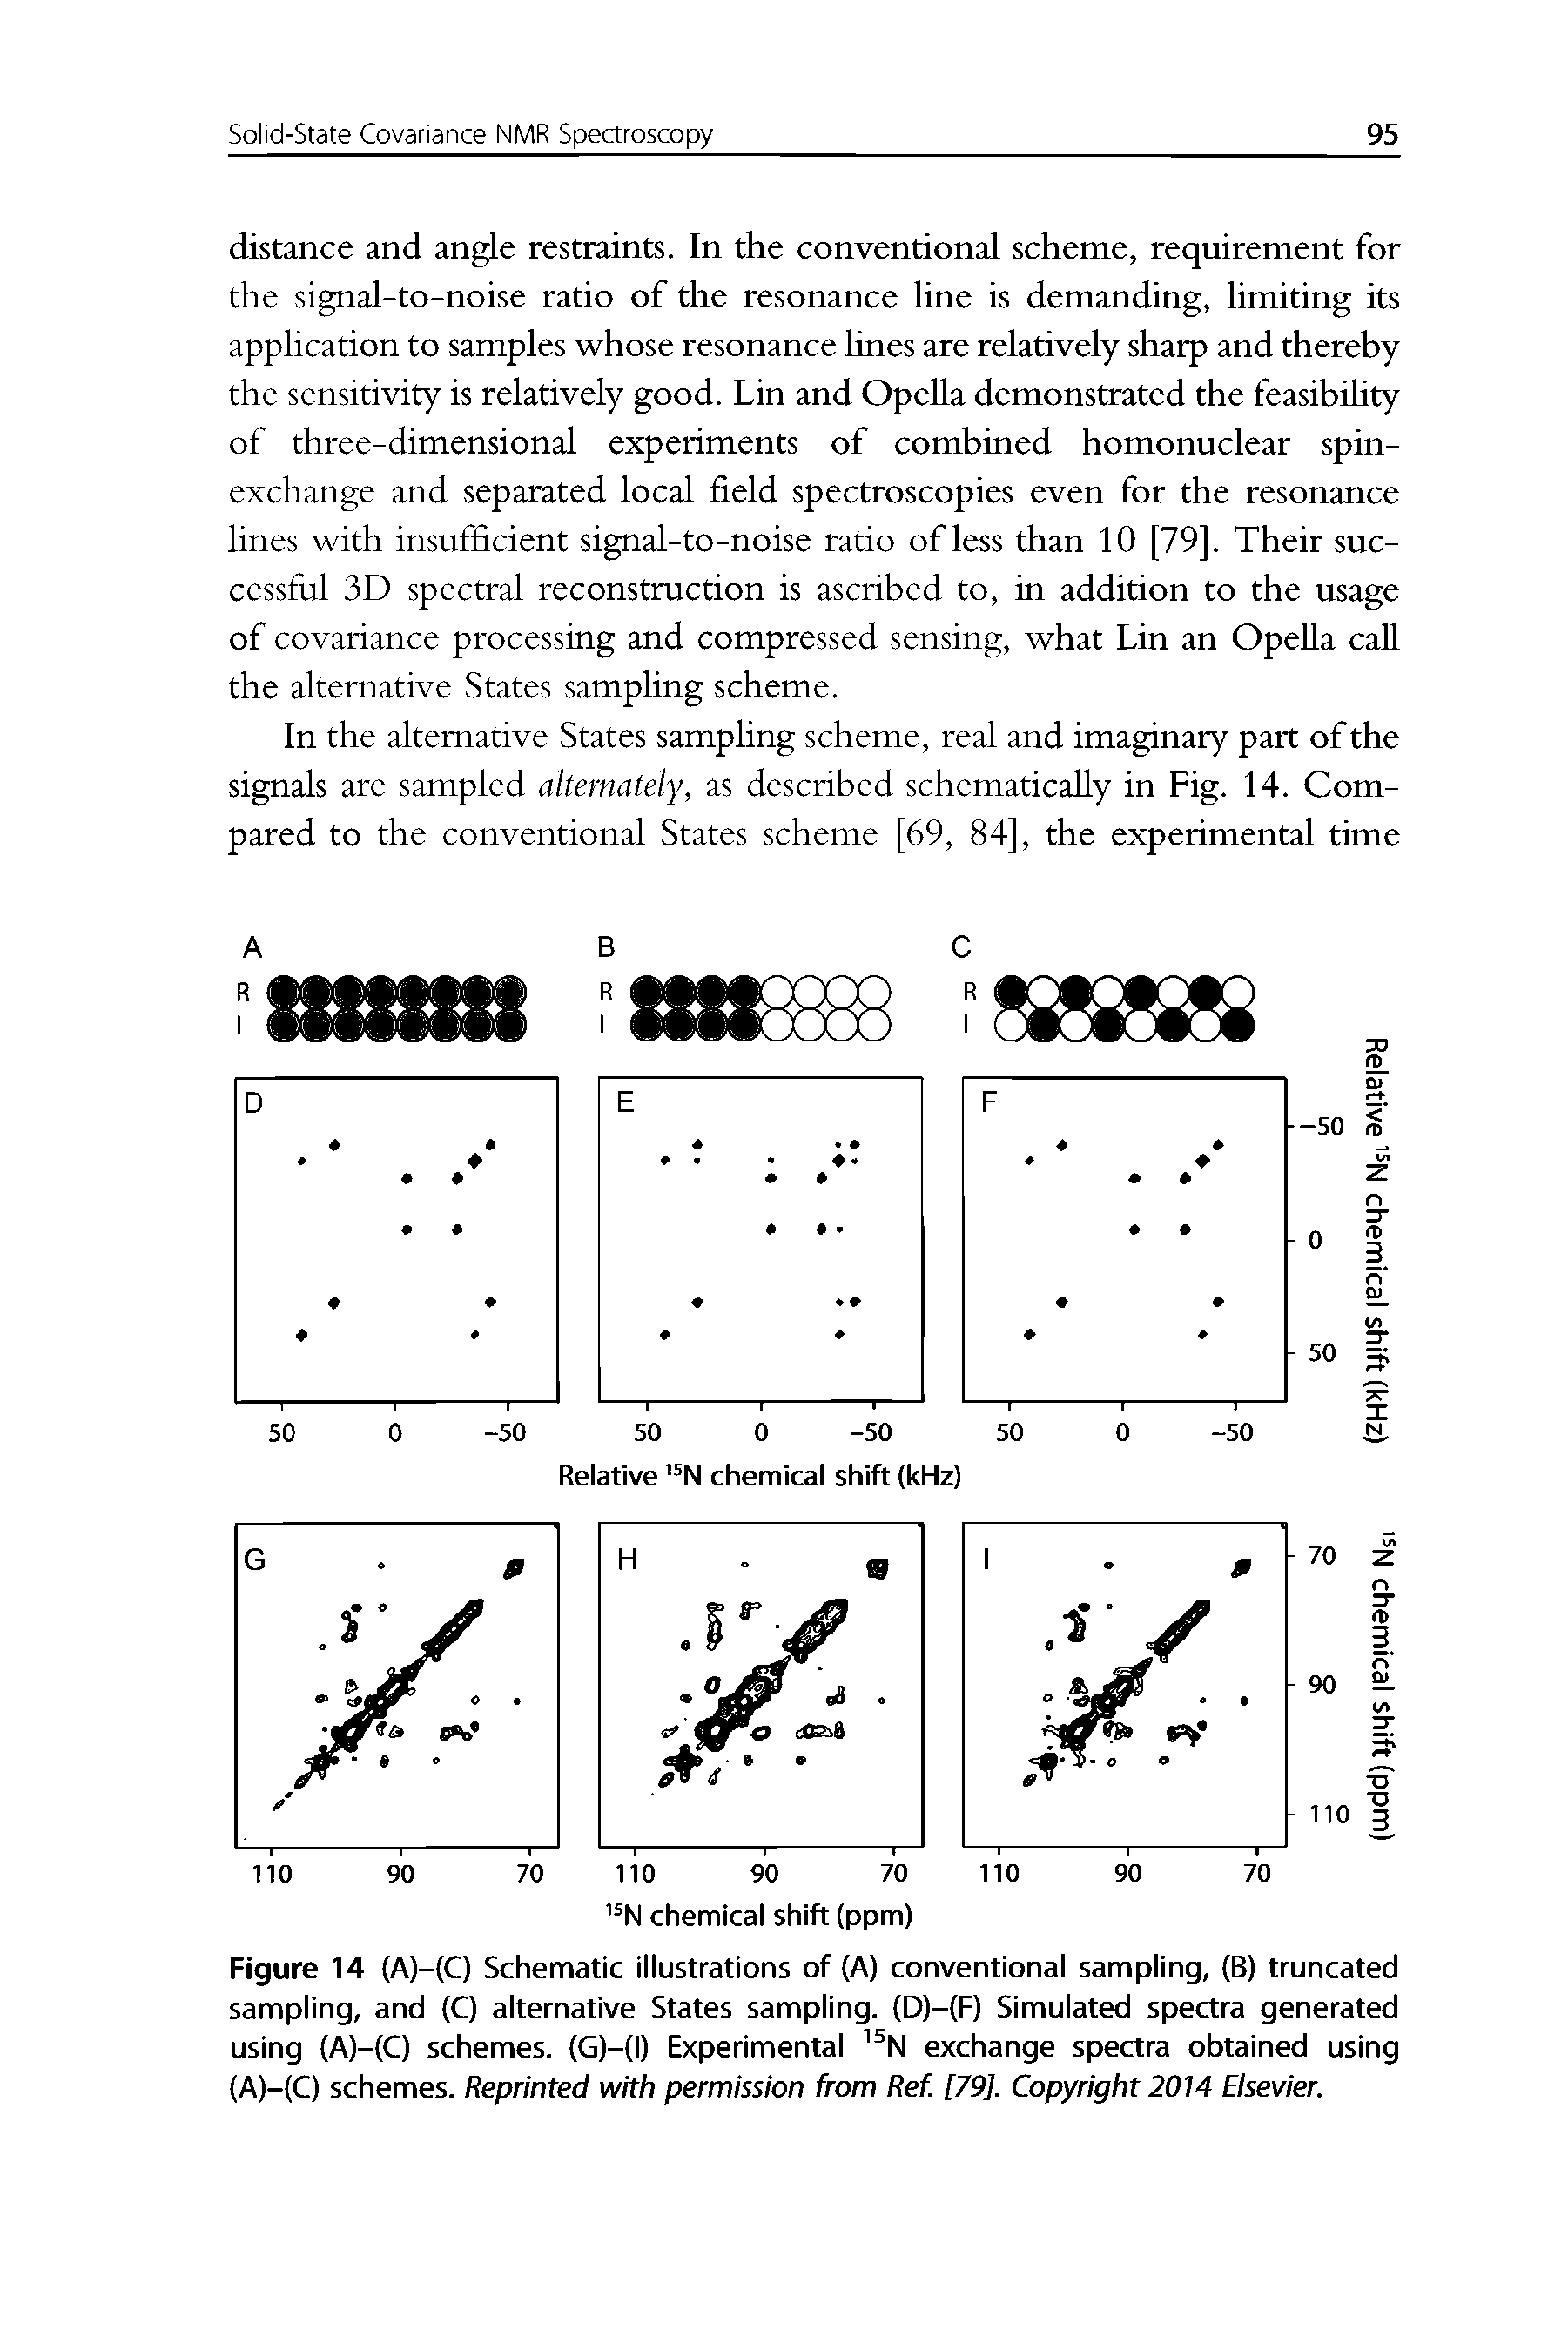 Figure 14 (A)-(C) Schematic illustrations of (A) conventional sampling, (B) truncated sampling, and (Q alternative States sampling. (D)-(F) Simulated spectra generated using (A)-(C) schemes. (G)-(l) Experimental exchange spectra obtained using (A)-(C) schemes. Reprinted with permission from Ref. [79]. Copyright 2014 Elsevier.